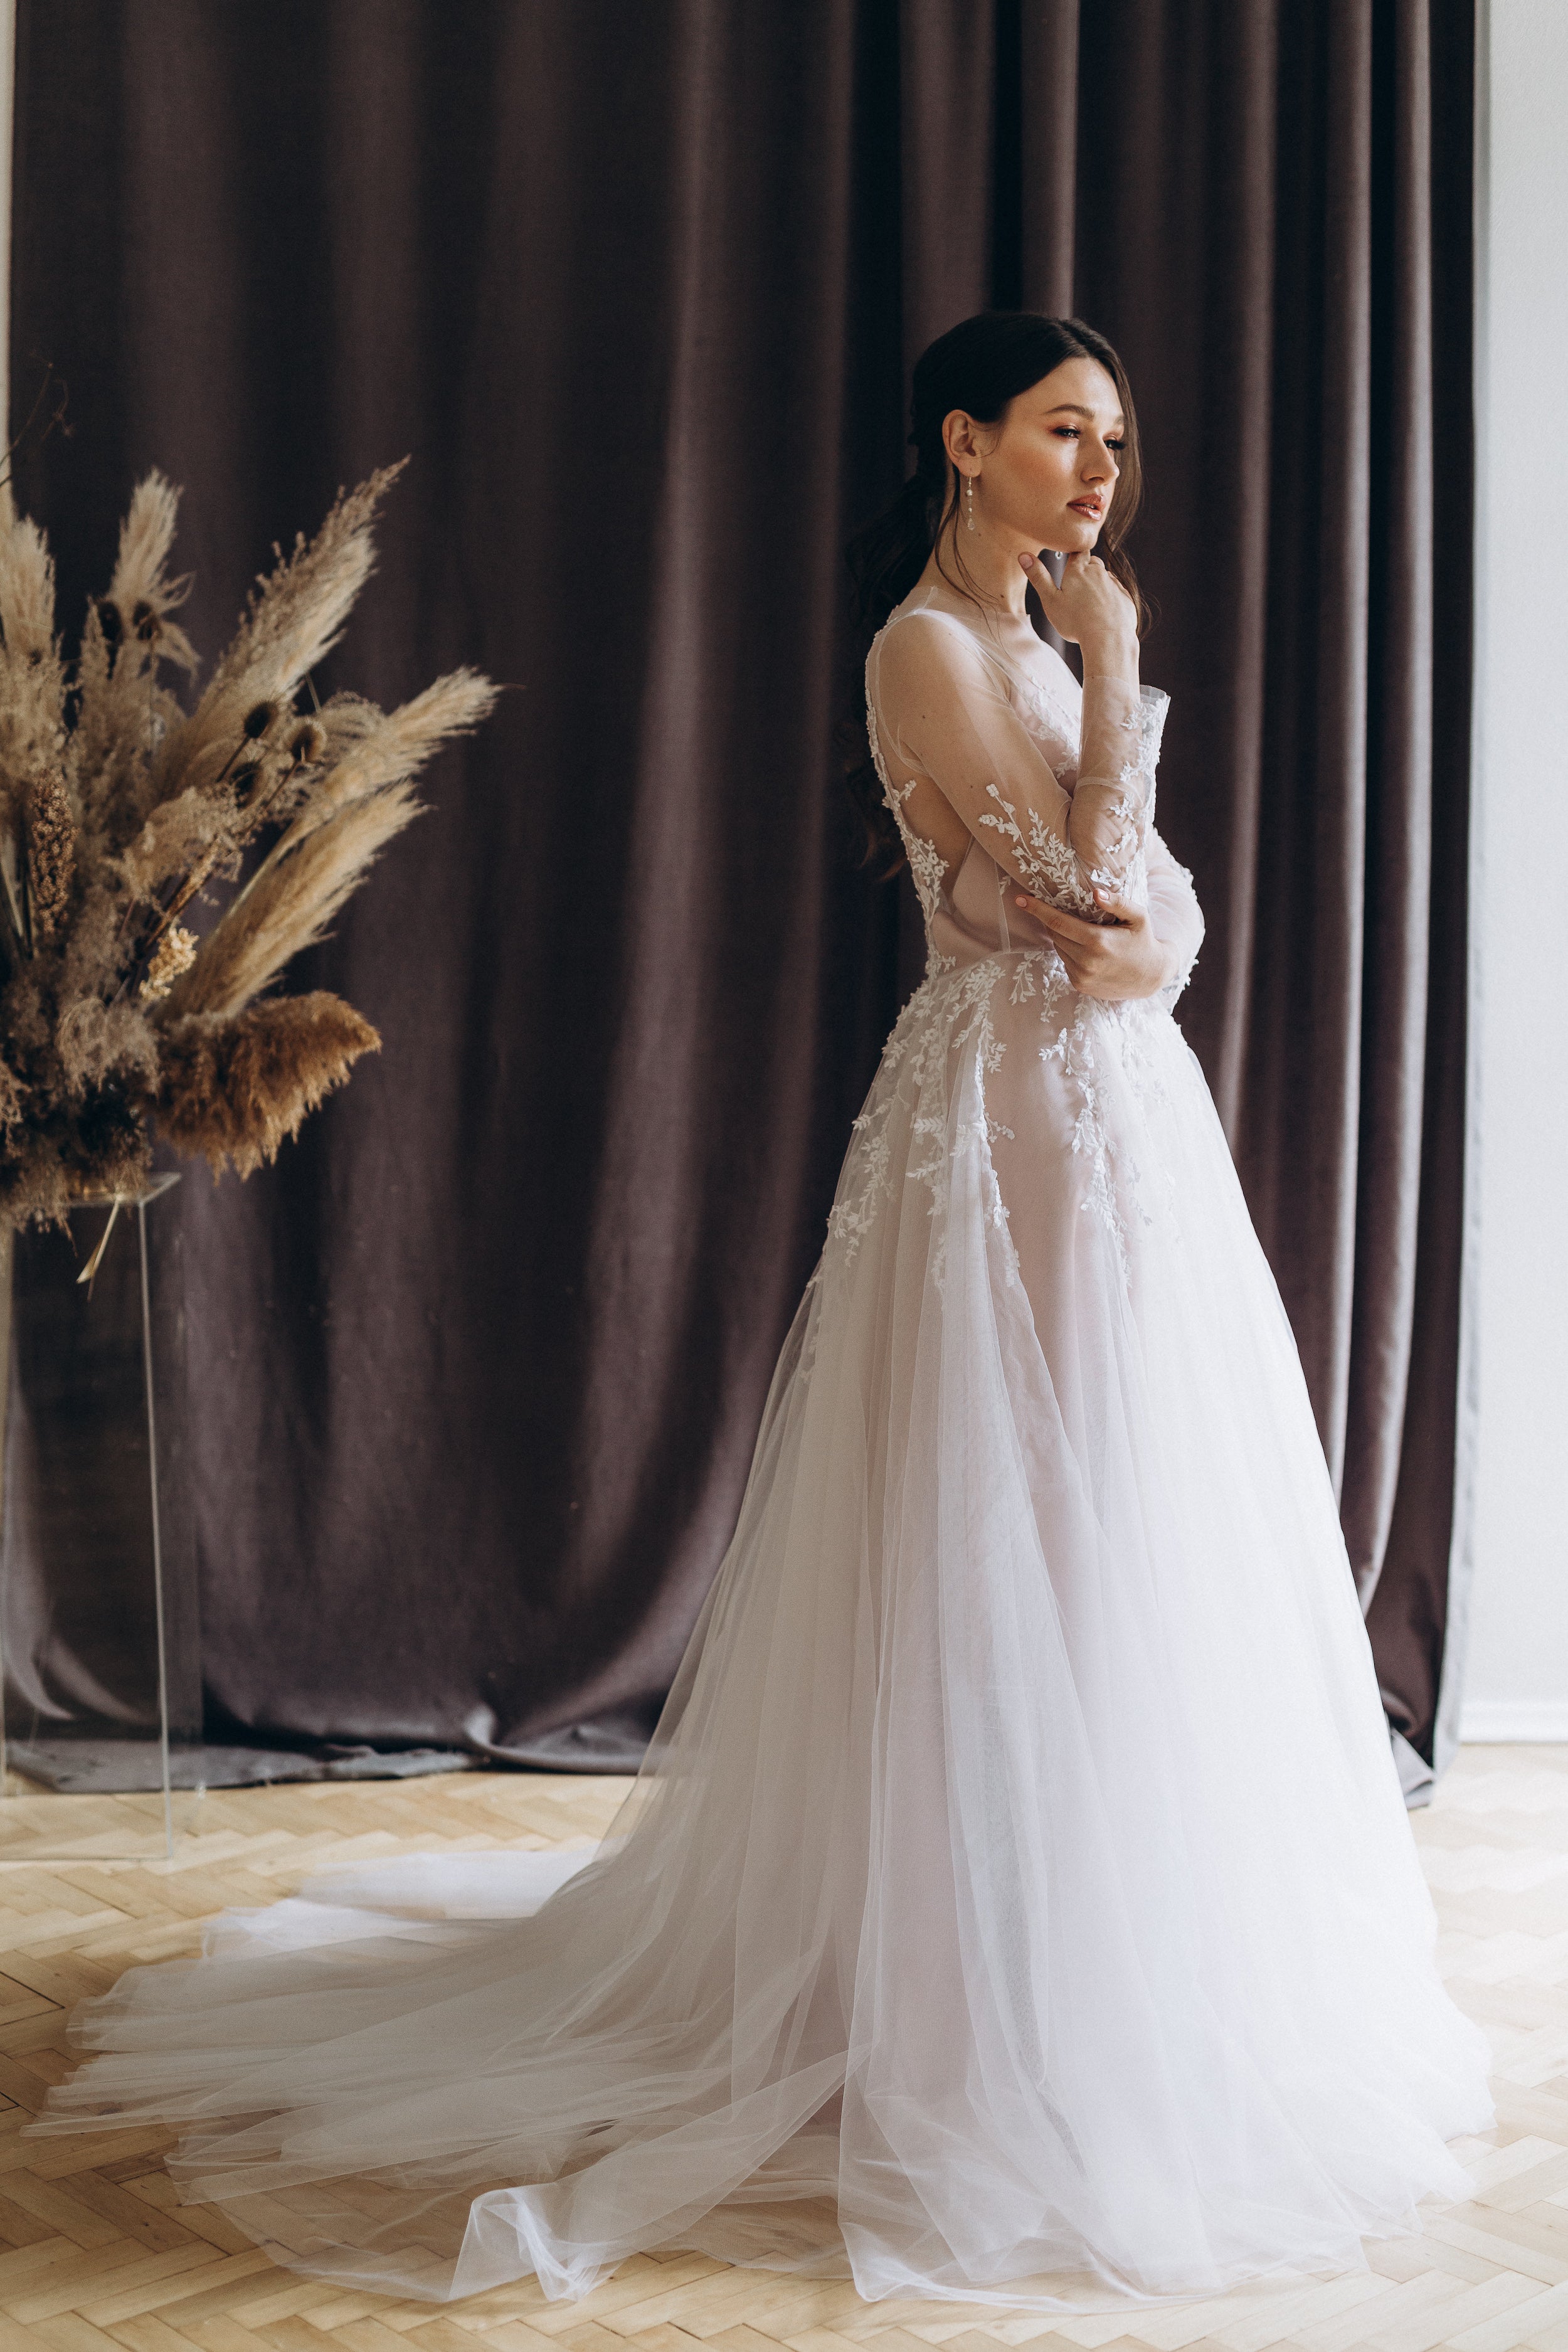 "Lilith" Two-piece wedding dress with sheer long sleeves